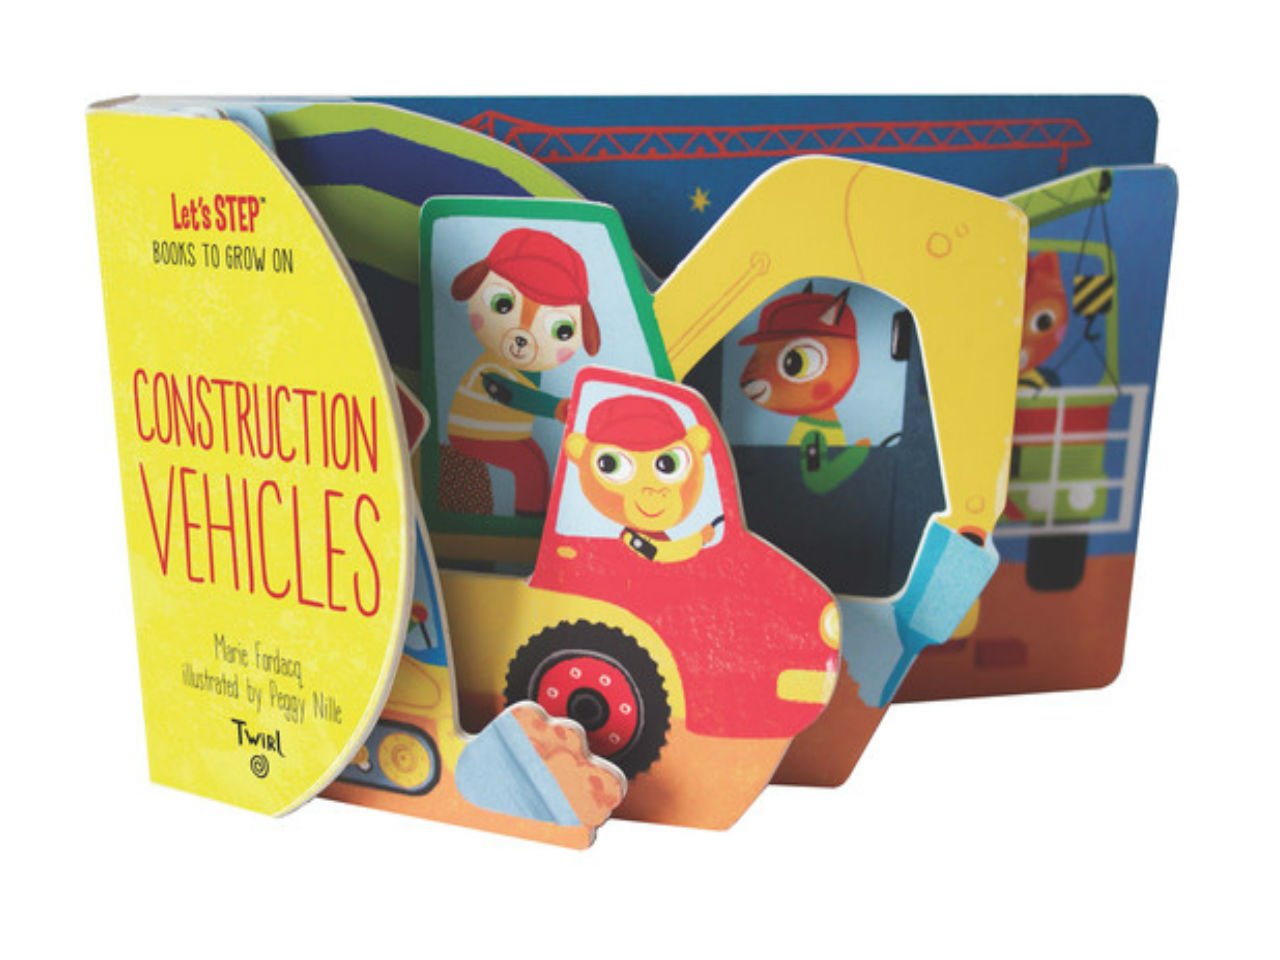 Photo of the board book Construction Vehicles showing the animals in the cars